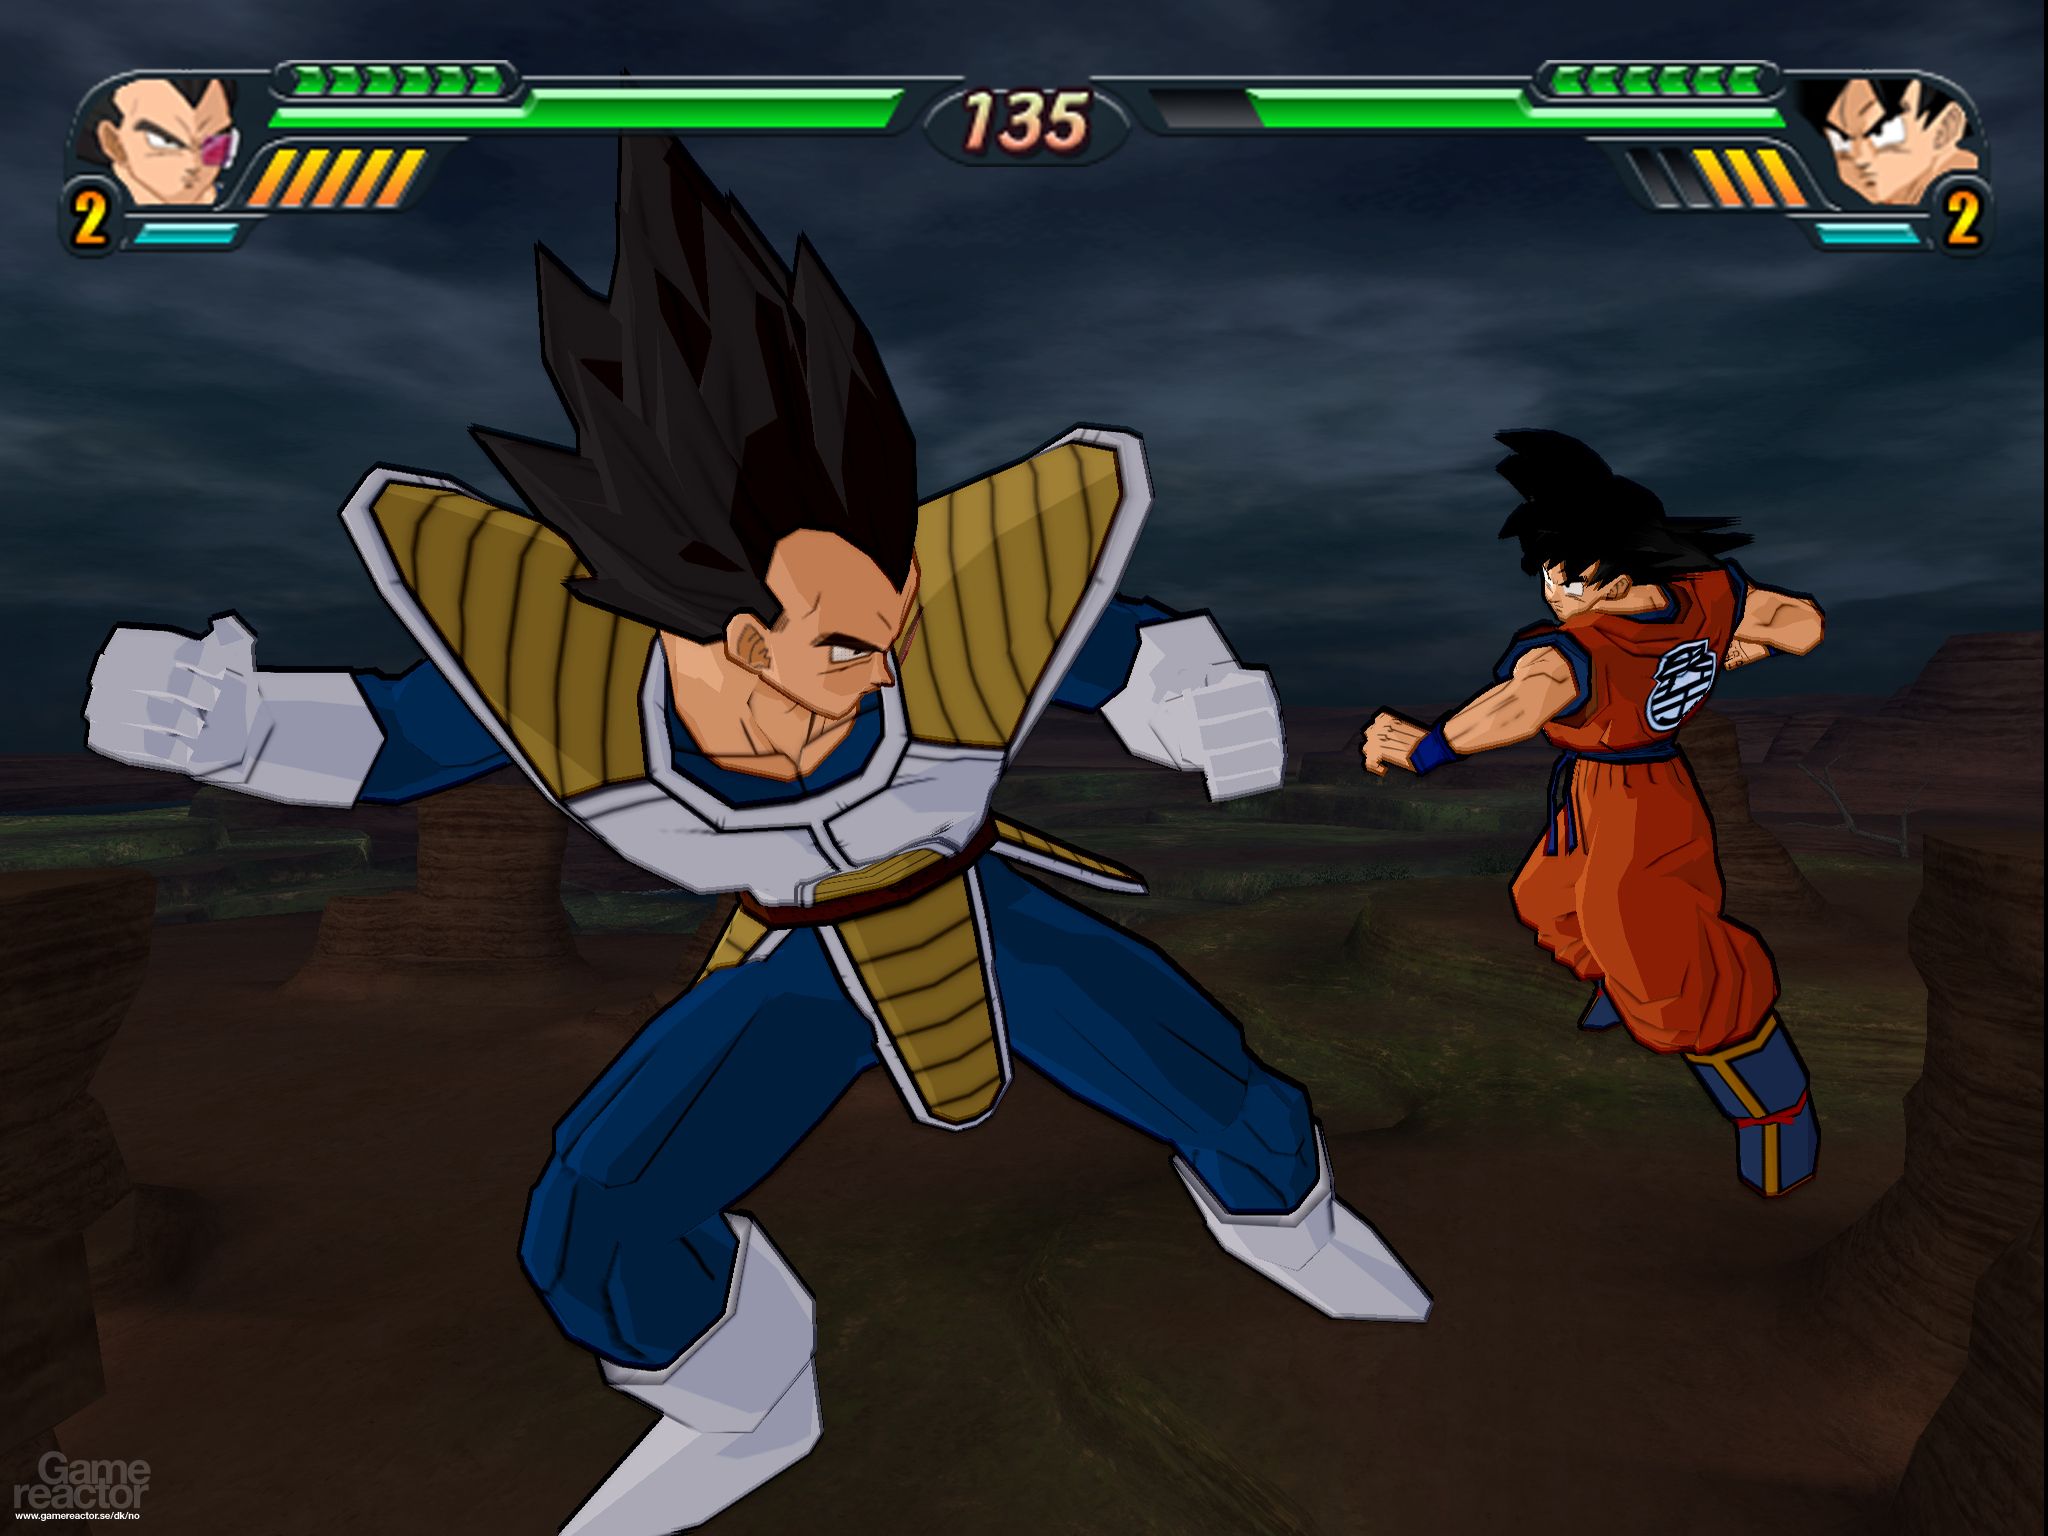 Dragon Ball: The Breakers Review - Gamereactor